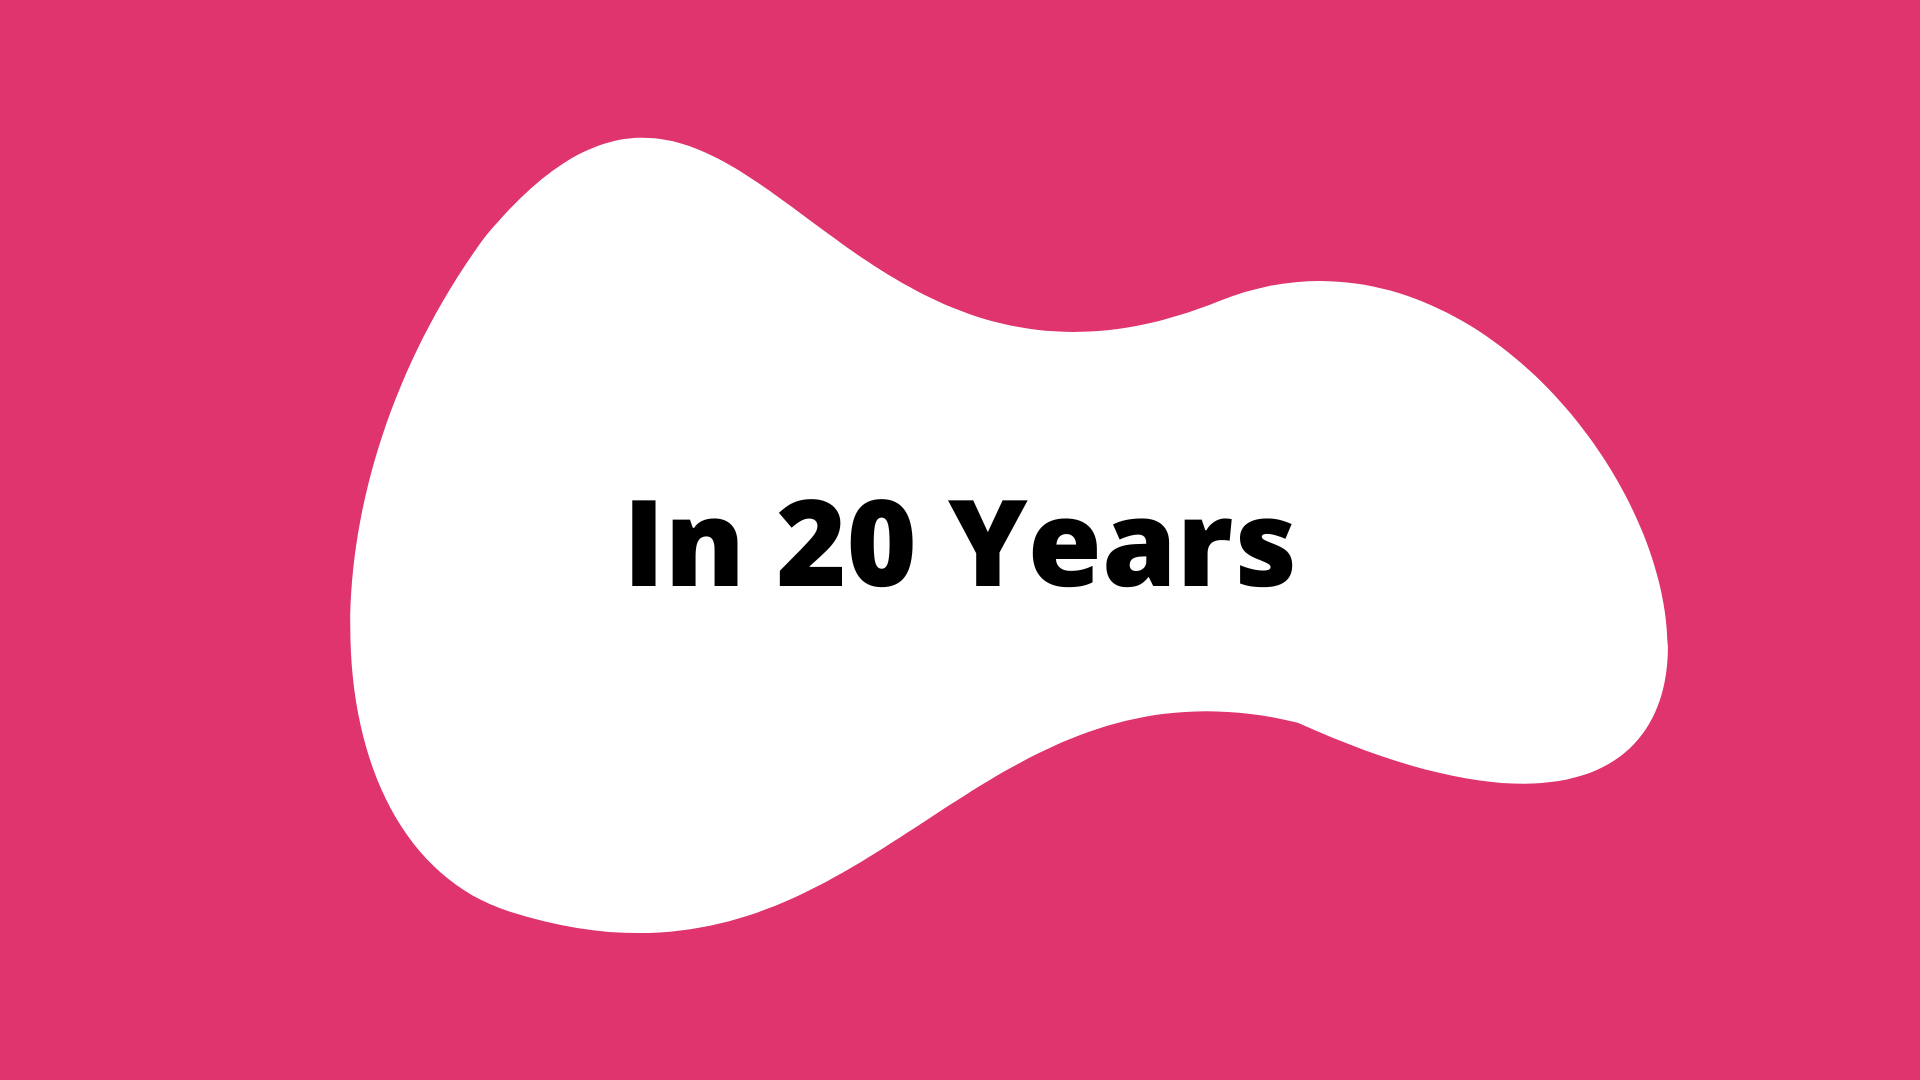 "In 20 Years" activity button. A pink square with a white blob in the center. The title is in the blob.